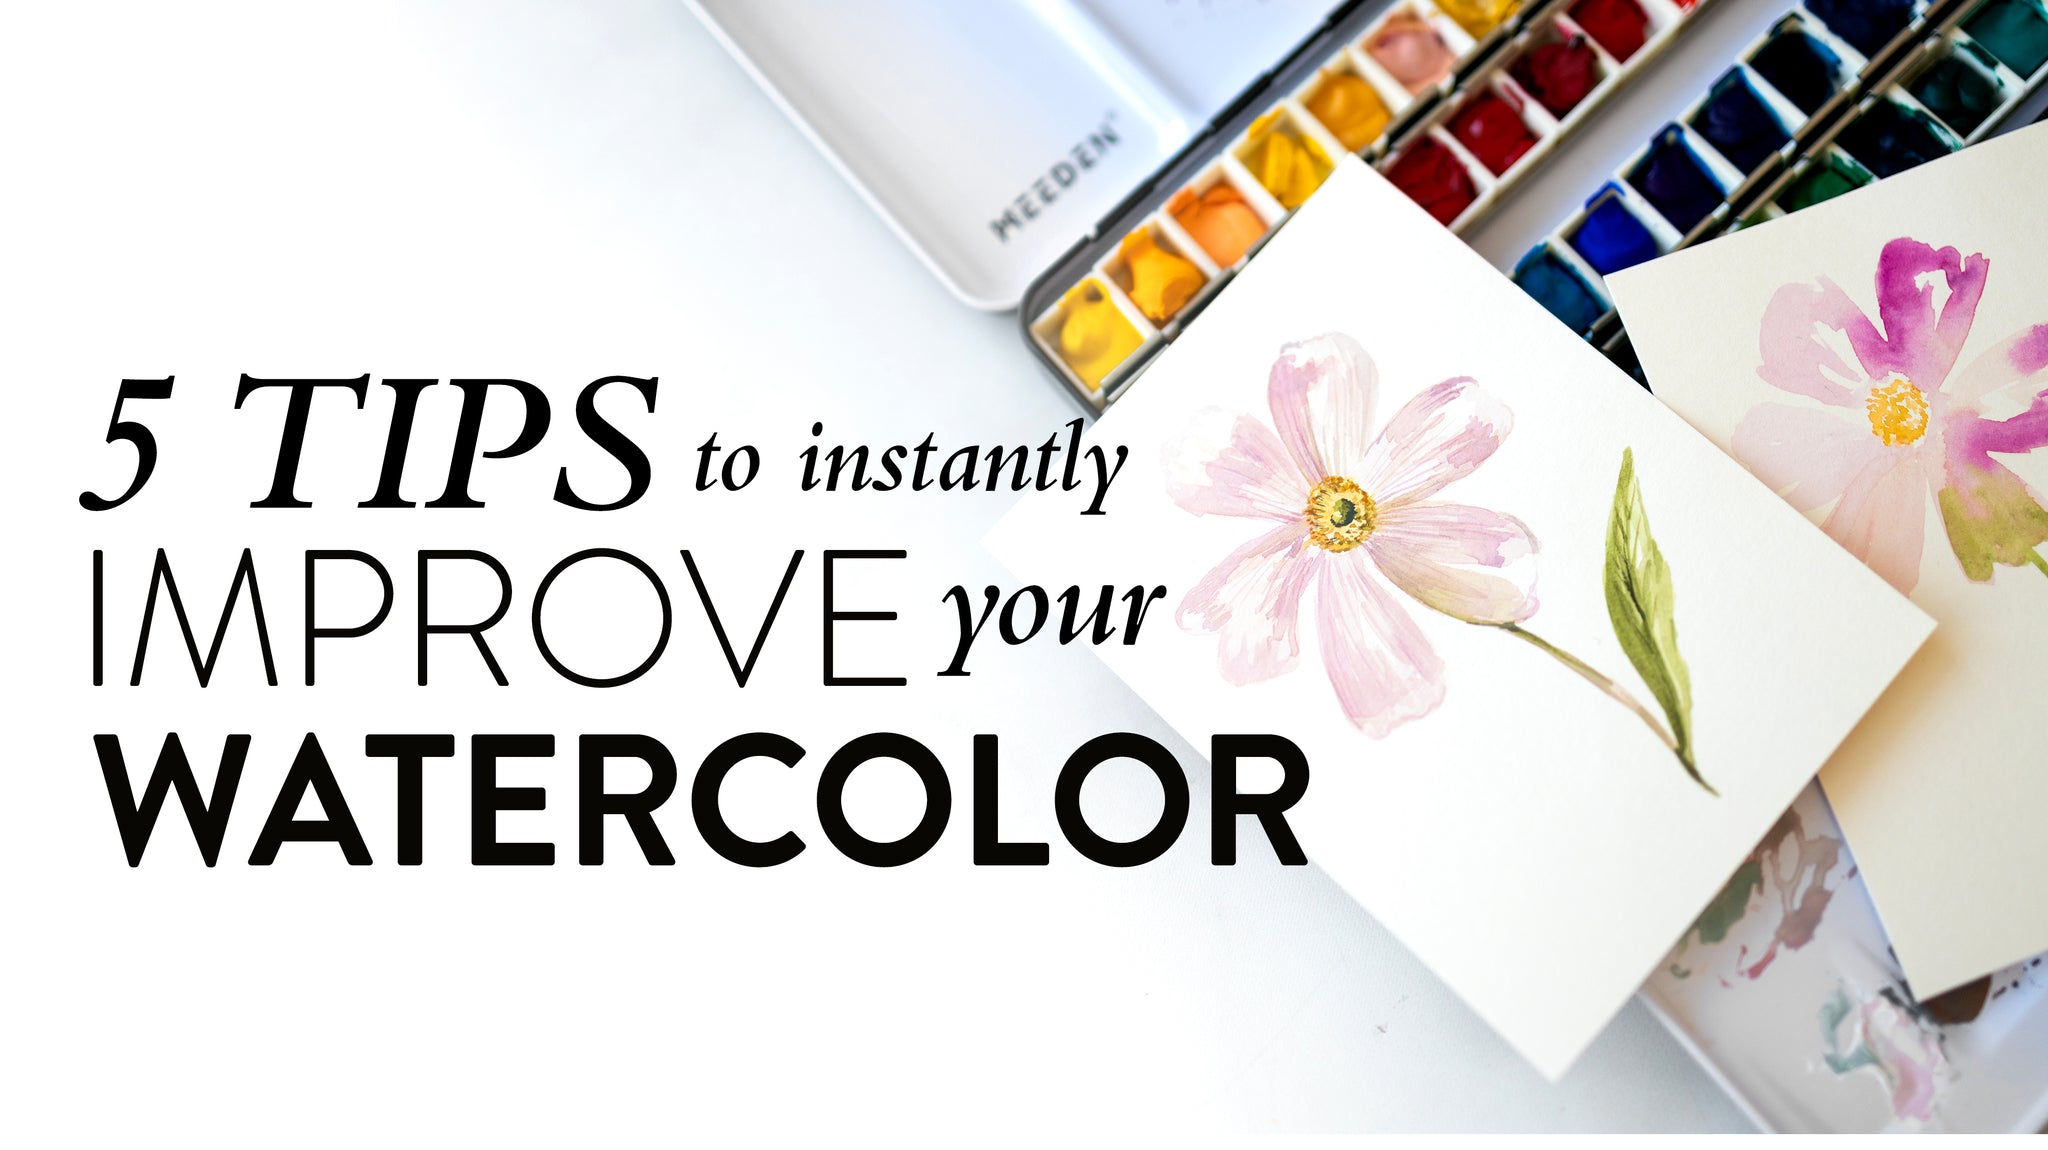 5 Important Watercolor Tips for Beginners